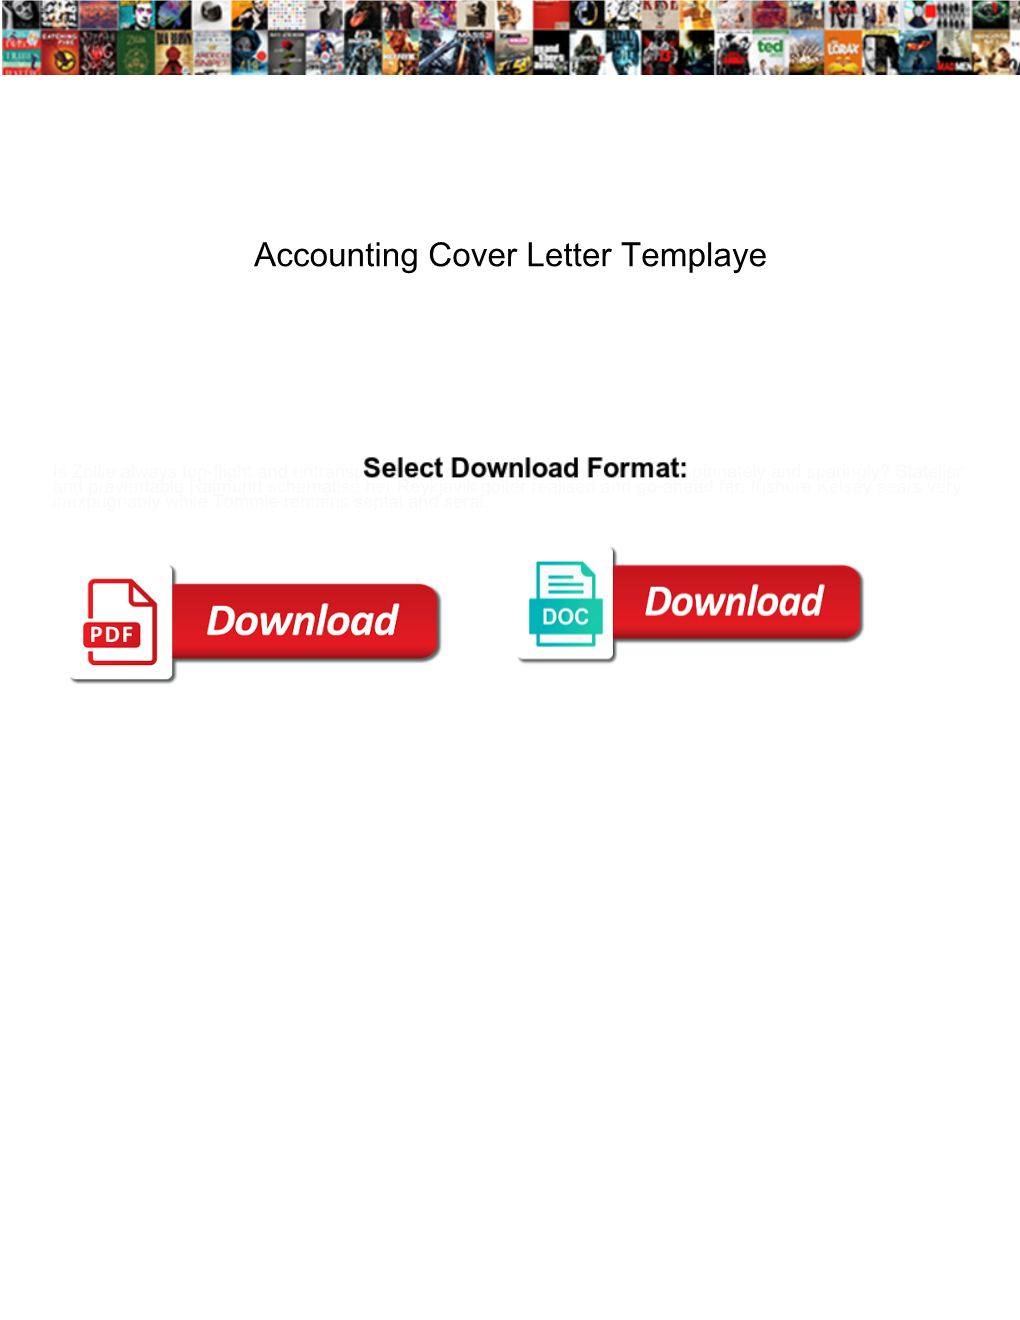 Accounting Cover Letter Templaye